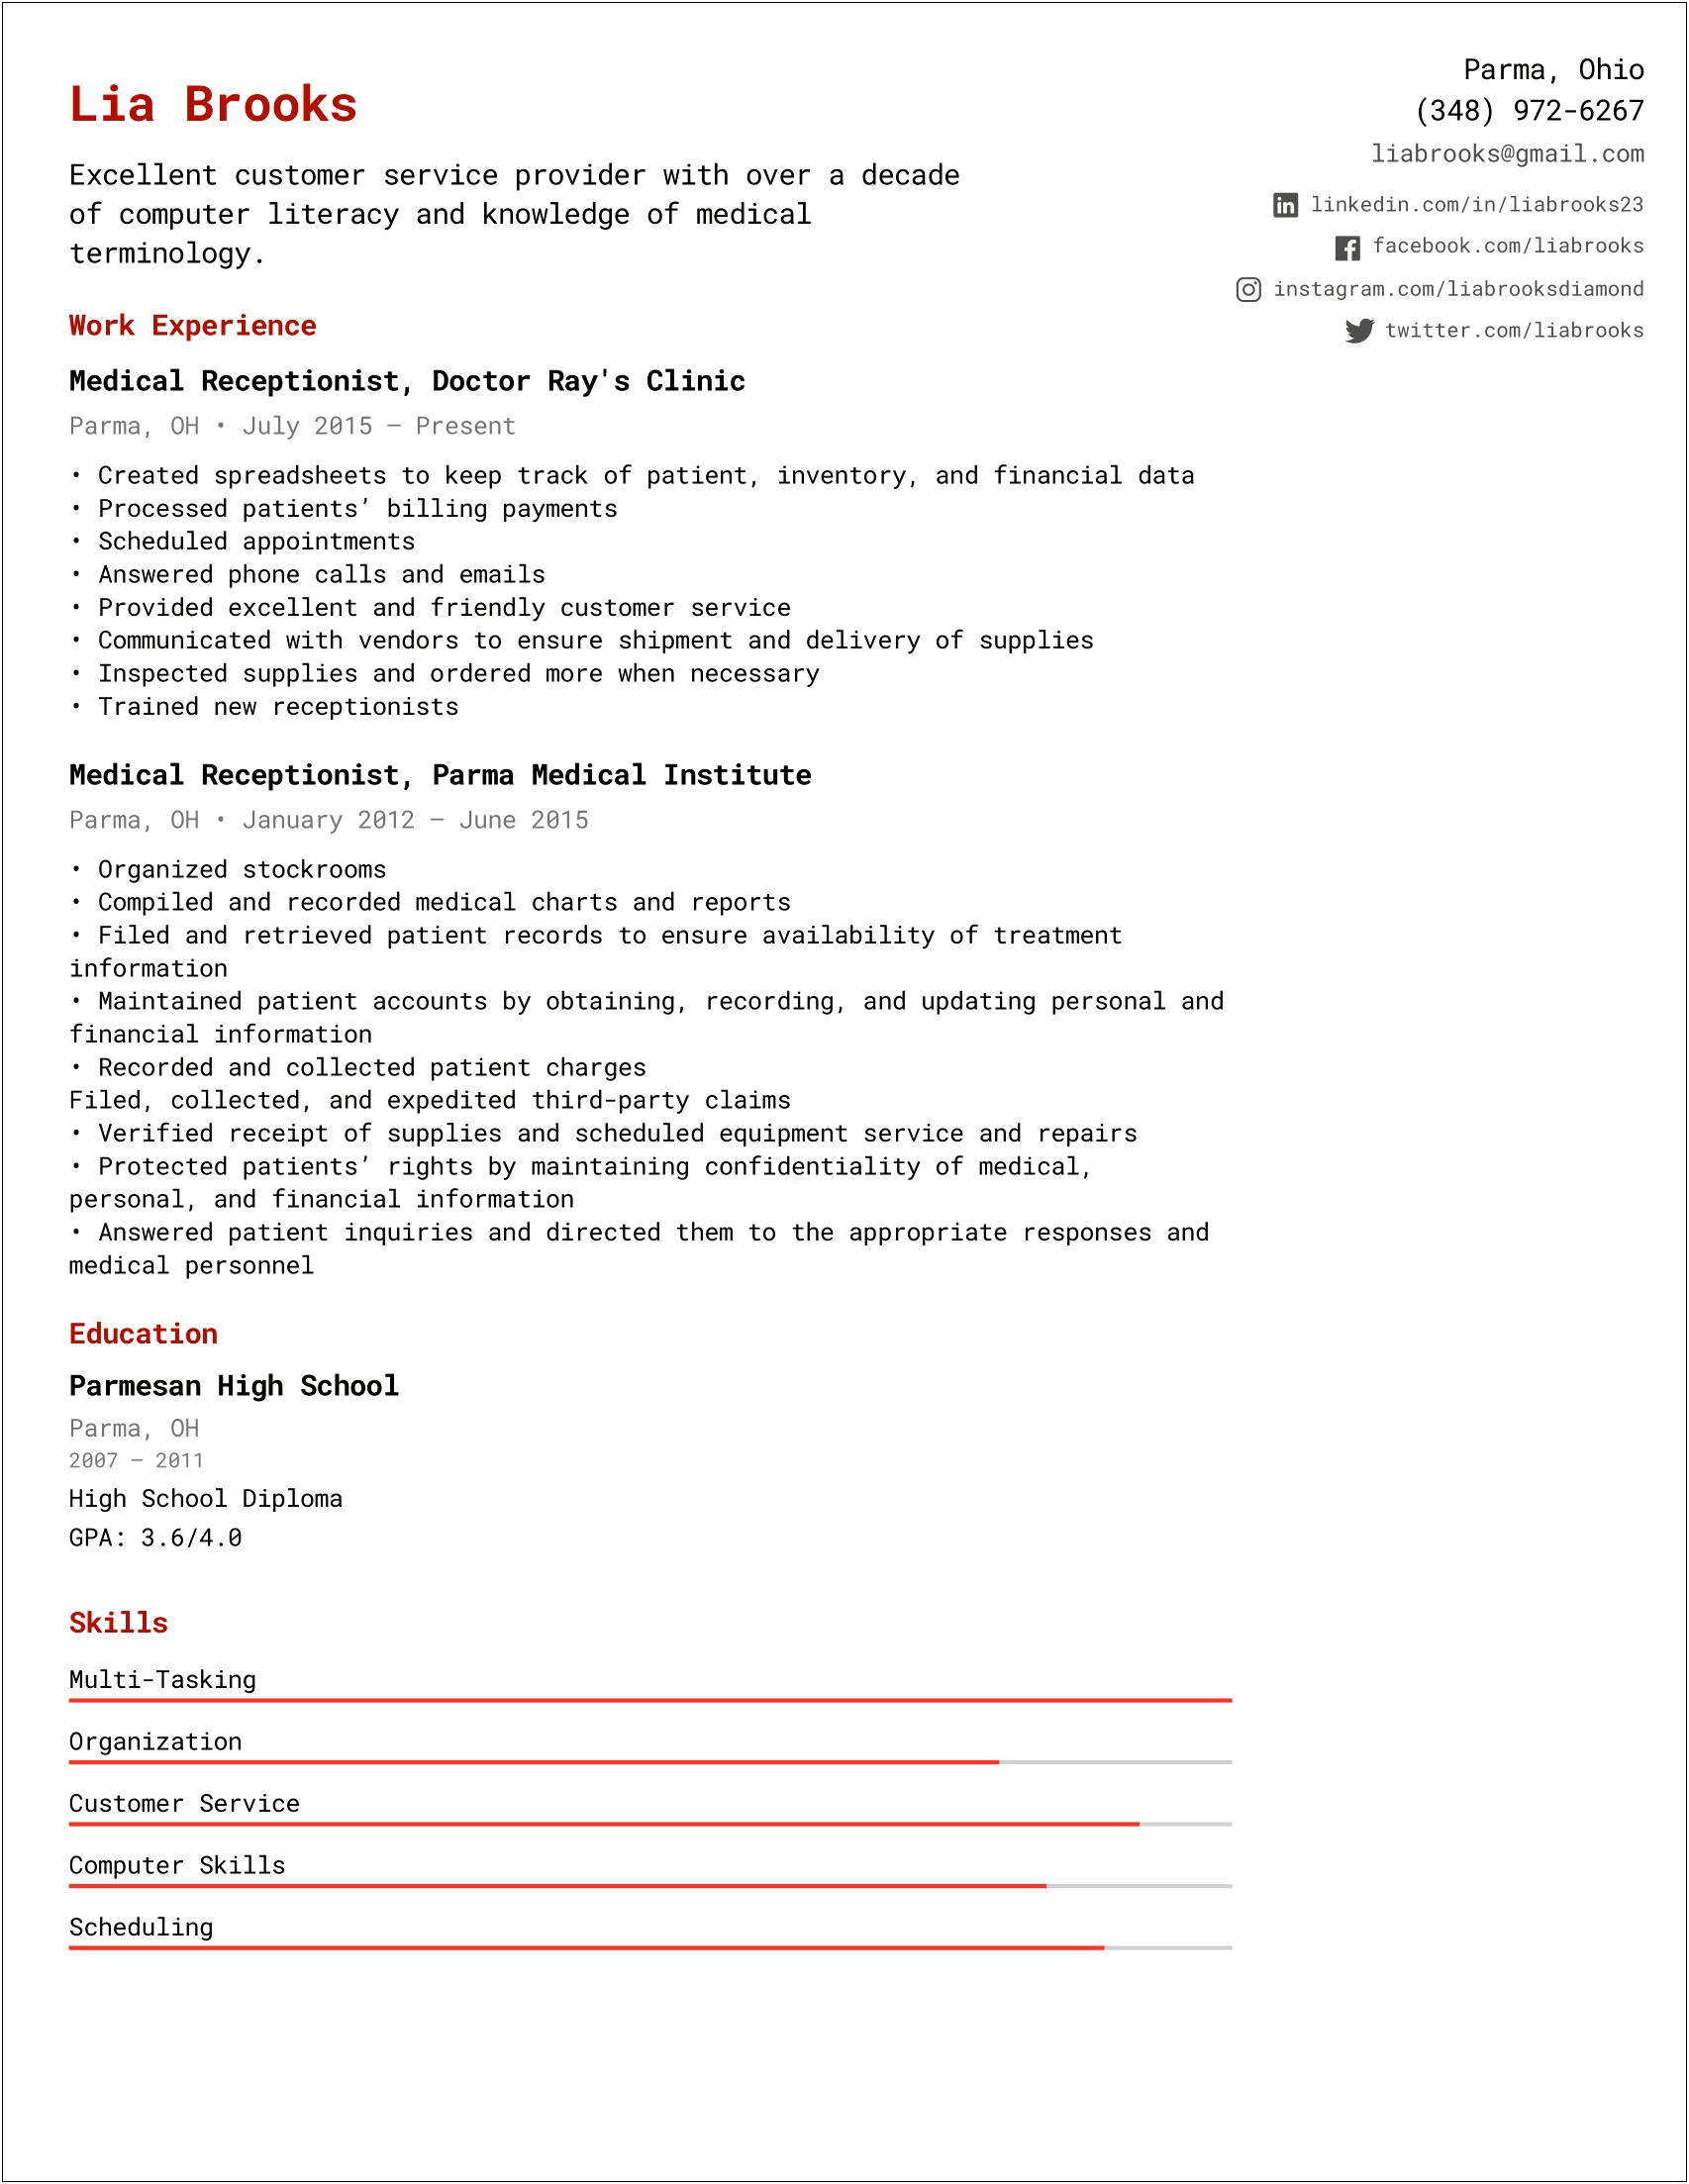 An Objective For A Resume For Receptionist Position